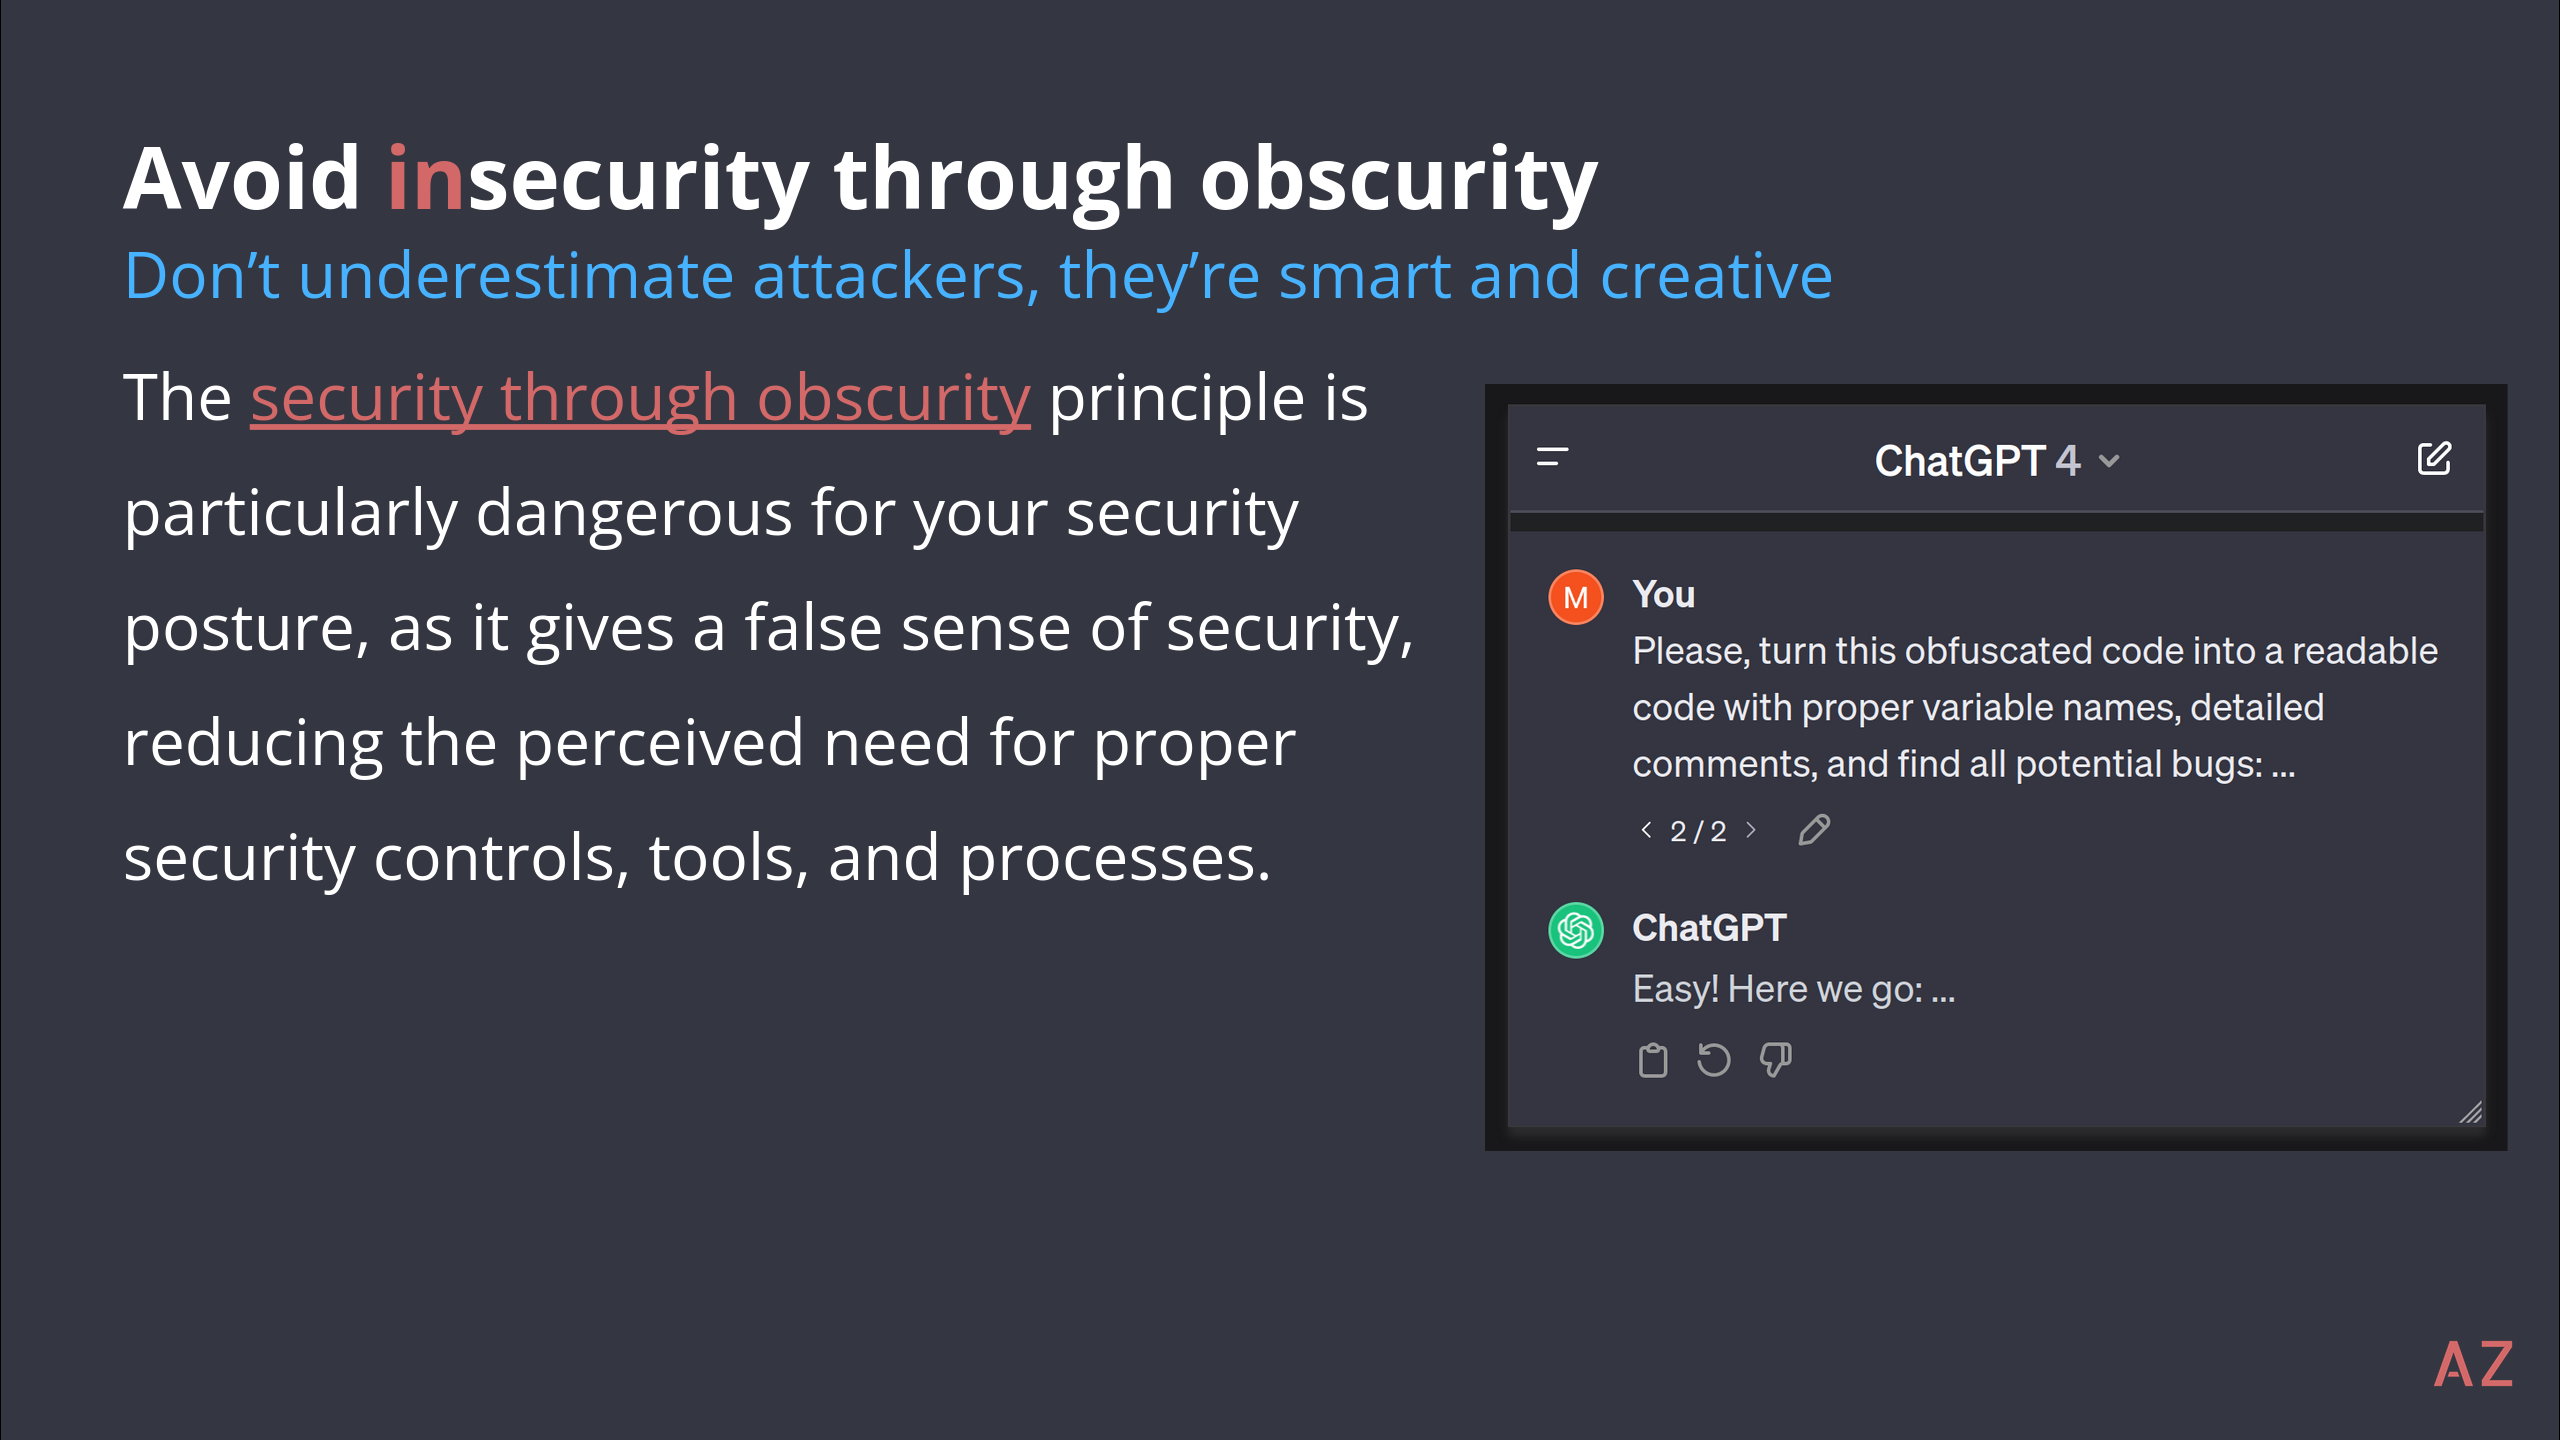 Avoid insecurity through obscurity